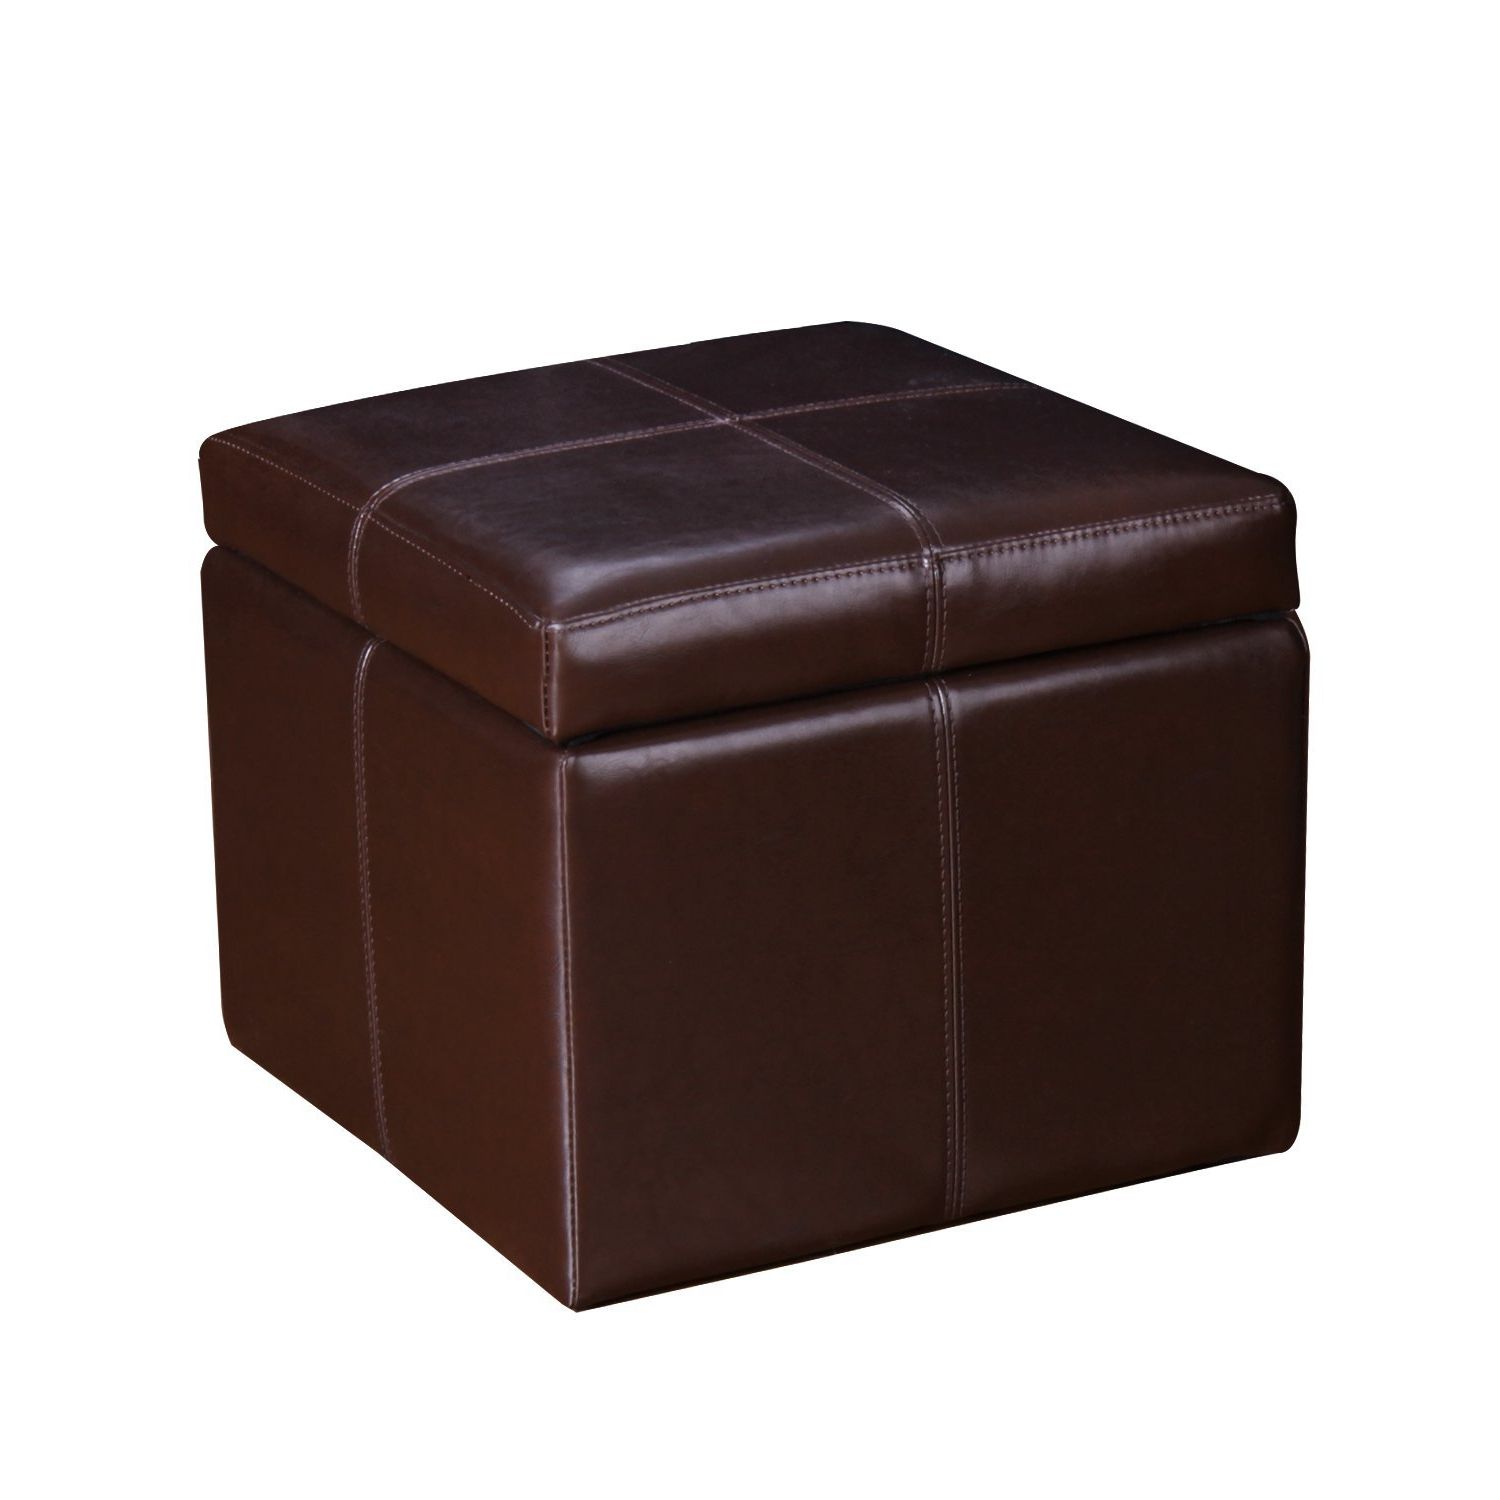 Most Recently Released Brown Leather Square Pouf Ottomans Within Joveco Bonded Leather Cross Stitch Square Cube Storage Ottoman (brown (View 8 of 10)